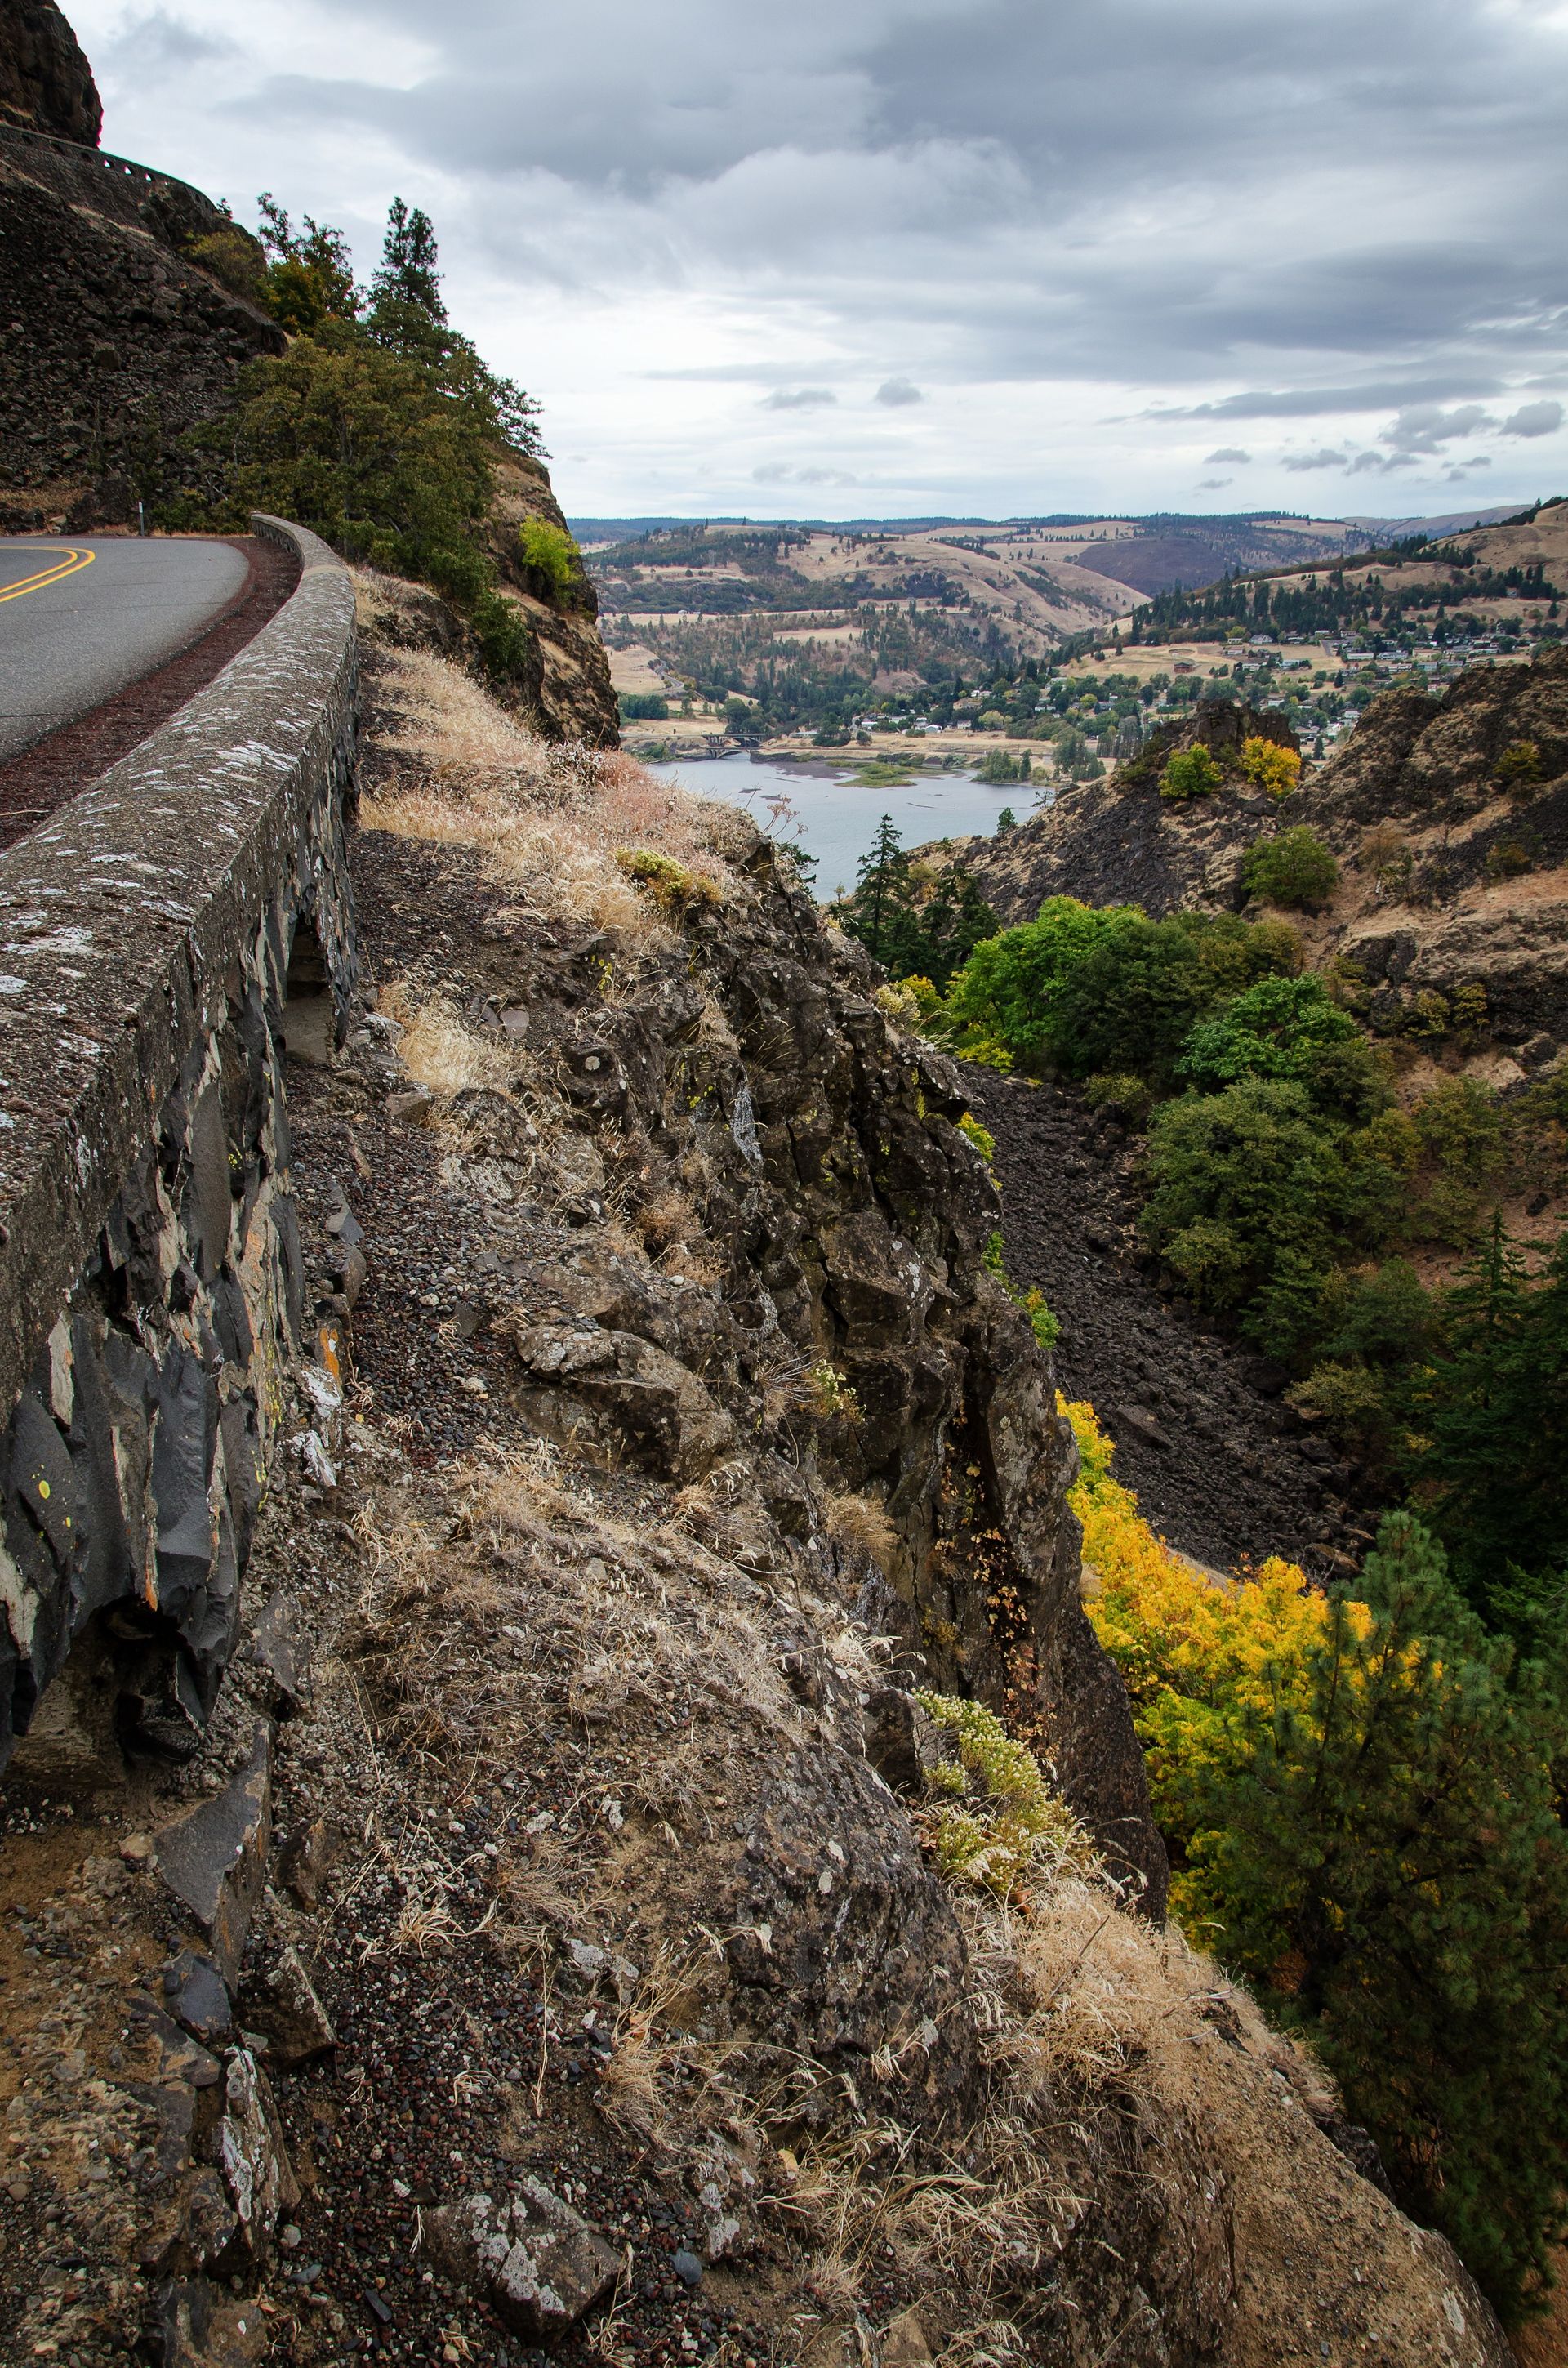 A view of the Columbia River from a cliff.